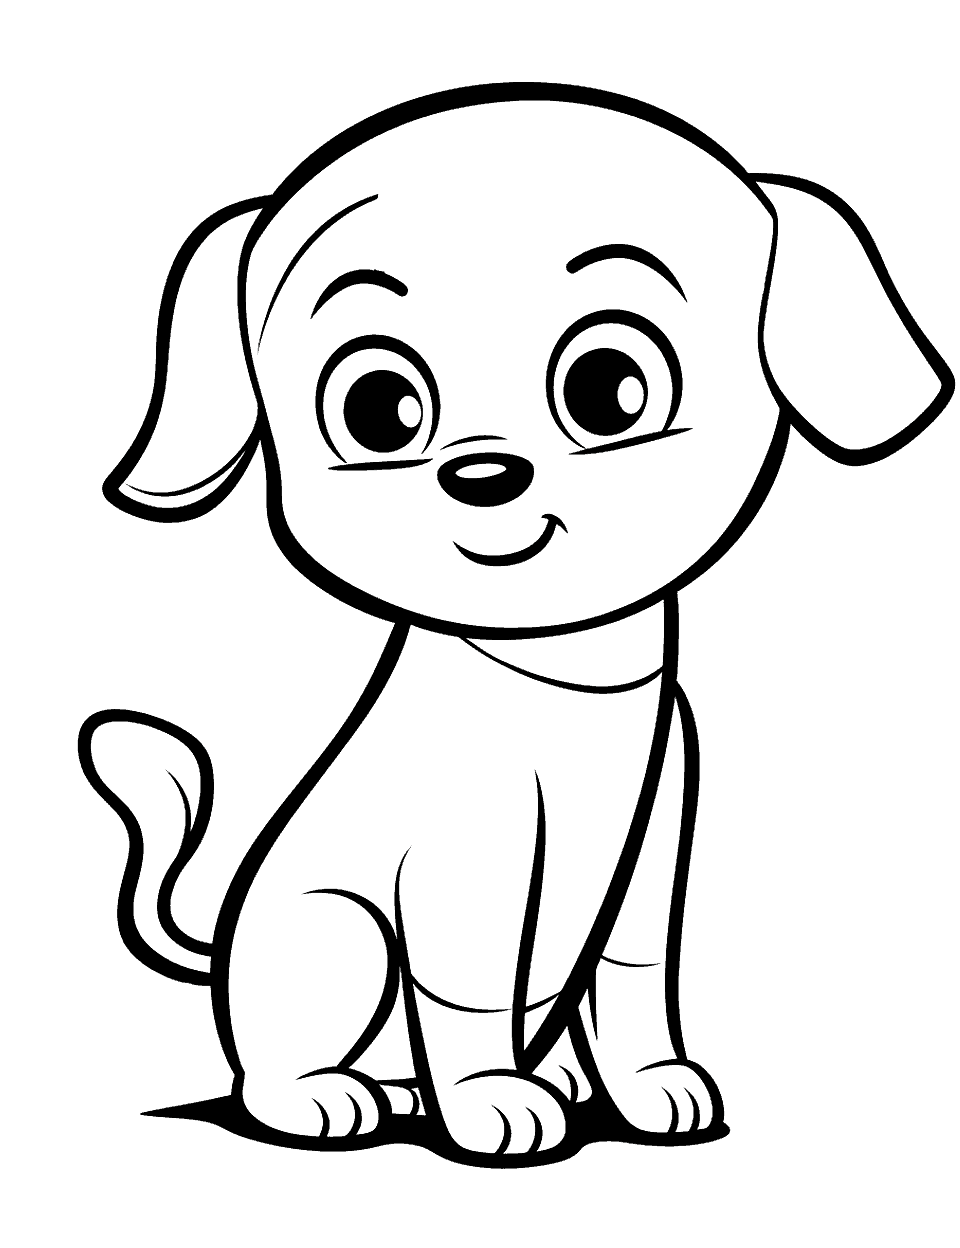 Puppy Love Coloring Page - A puppy sitting alone looking super cute.